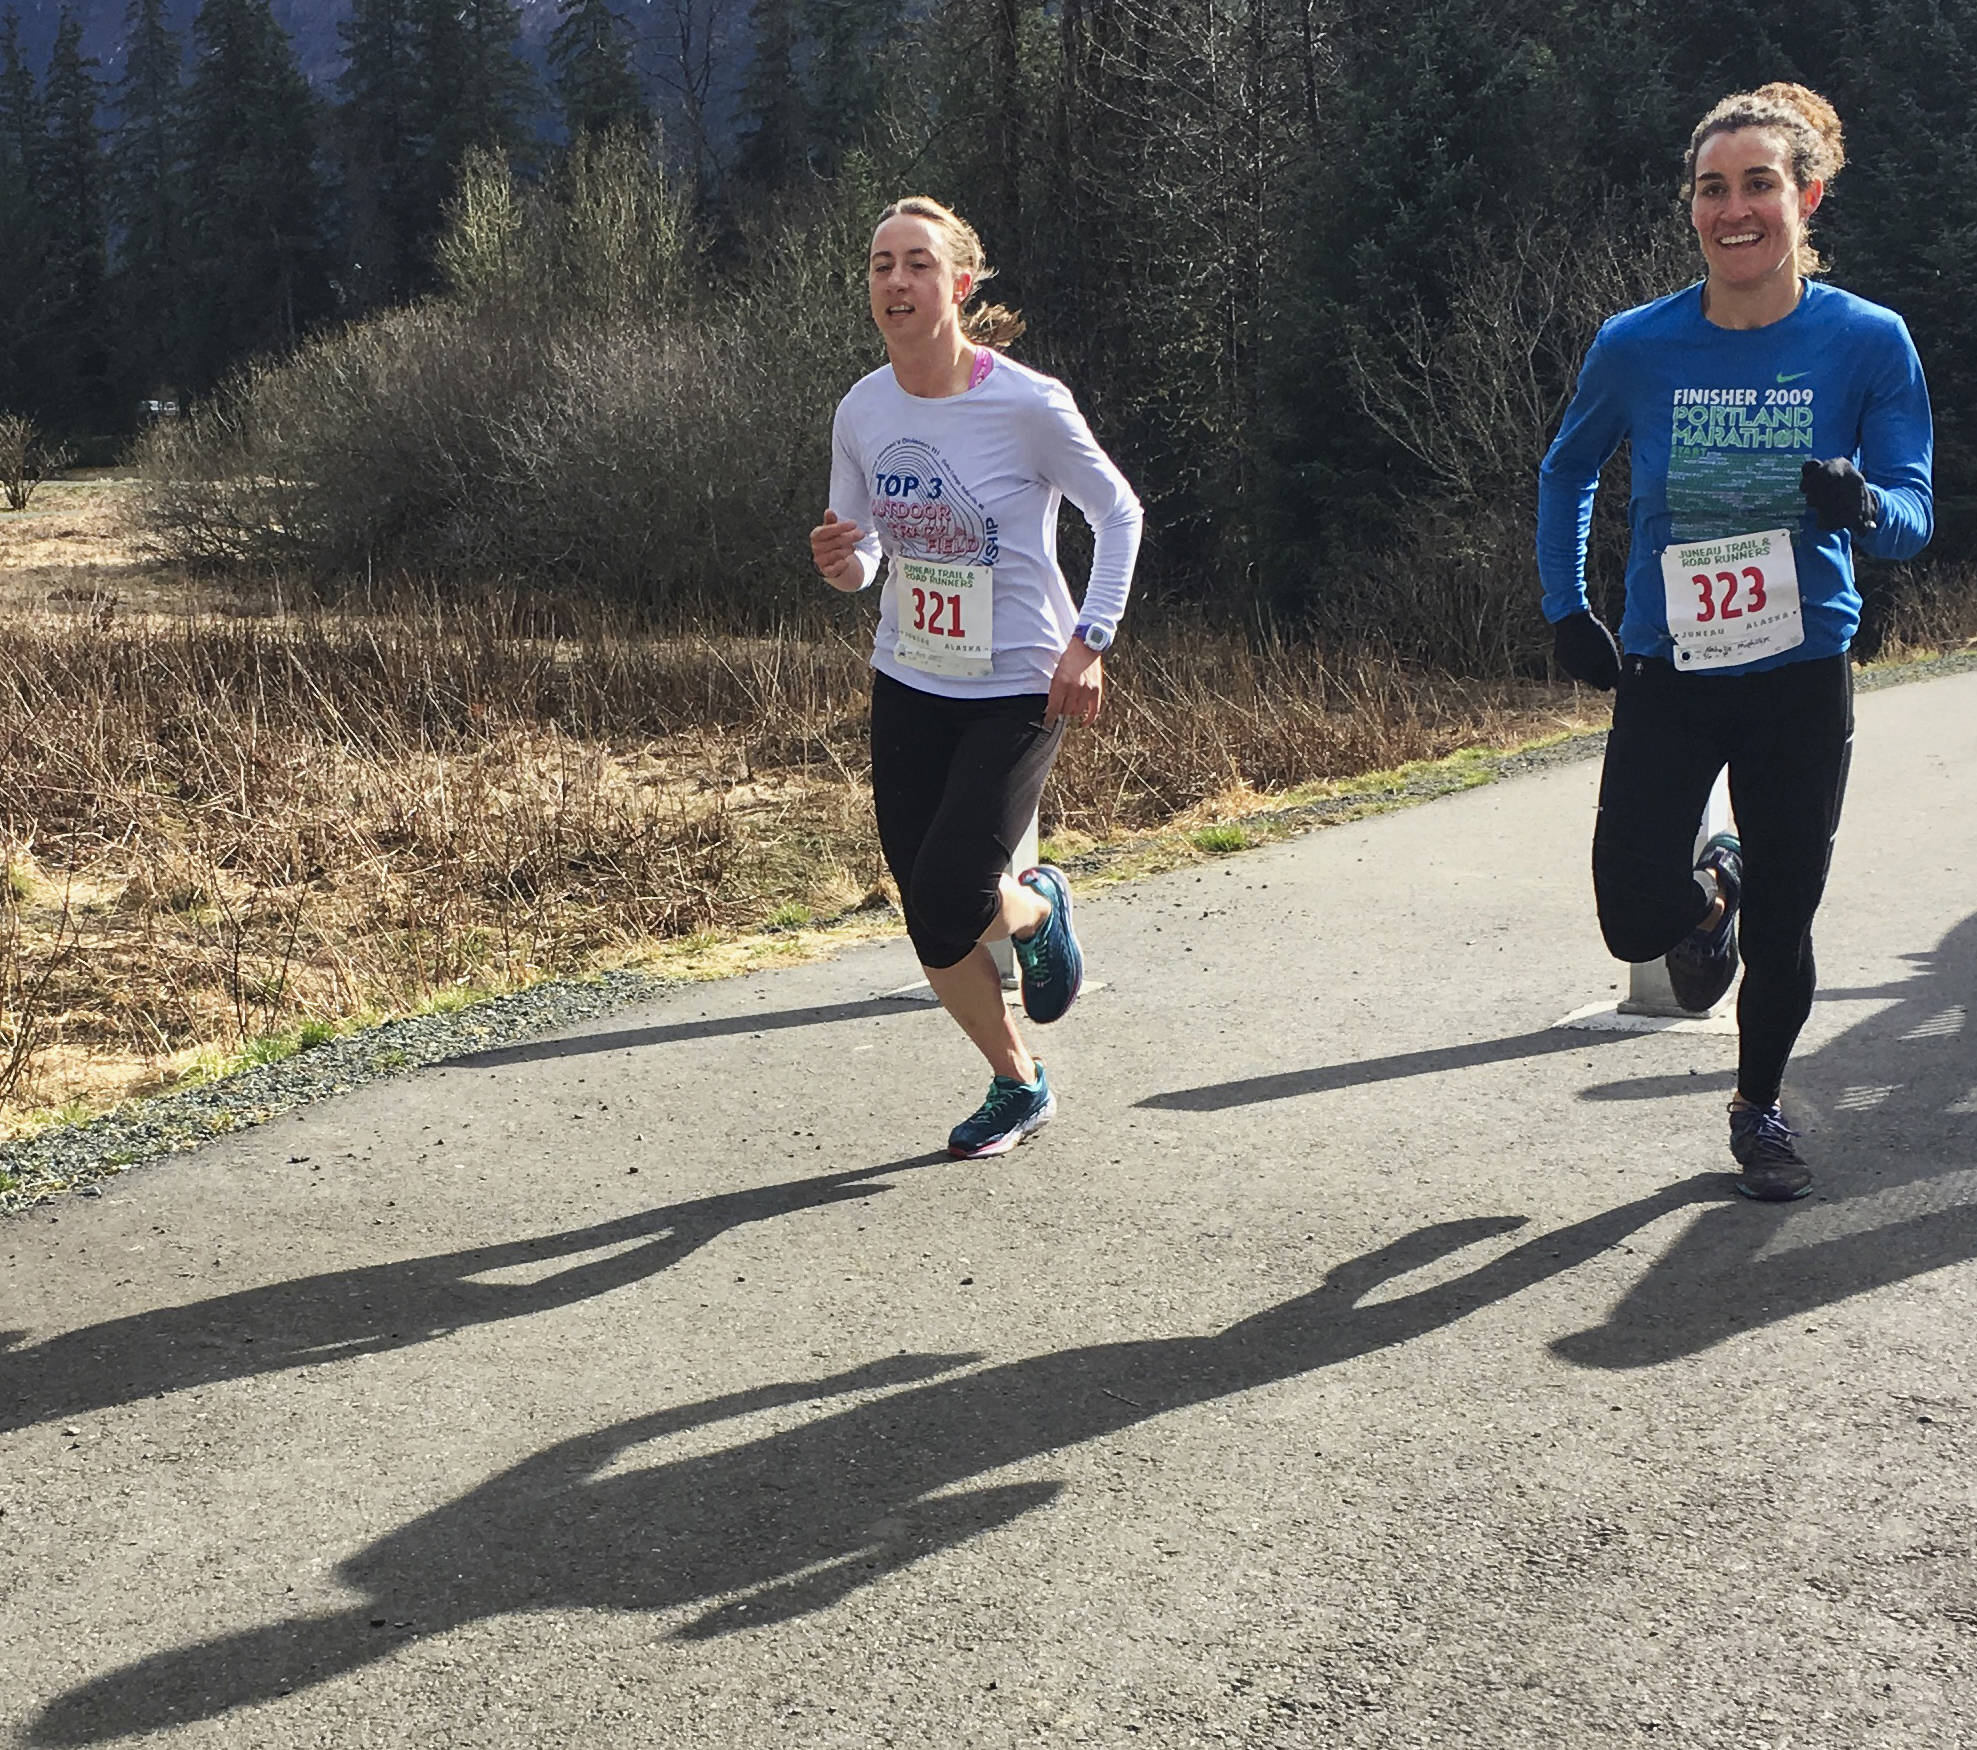 Beth Gollin and Natalie McPhillips race in the Pavitt Health and Fitness 7K on Saturday at the Brotherhood Bridge Parking Lot. (Courtesy Photo | Linda Kruger)